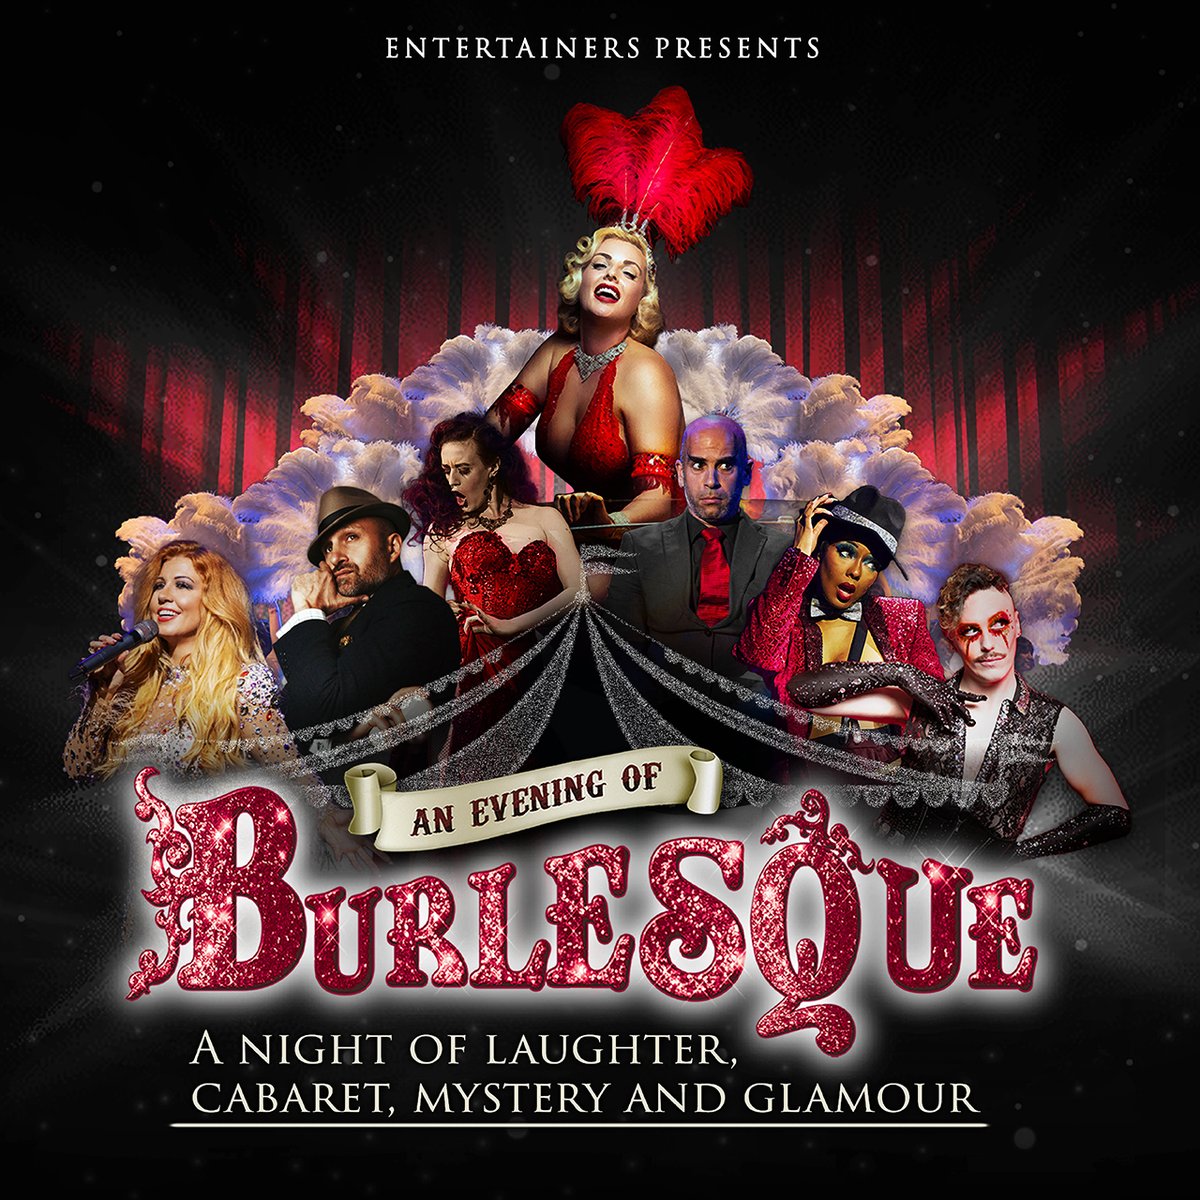 'An Evening of Burlesque' will return to #Dudley in Nov 2025. Join us for another scintillating night of laughter, cabaret, mystery and glamour! ✨ 🎟️ boroughhalls.co.uk/an-evening-of-…